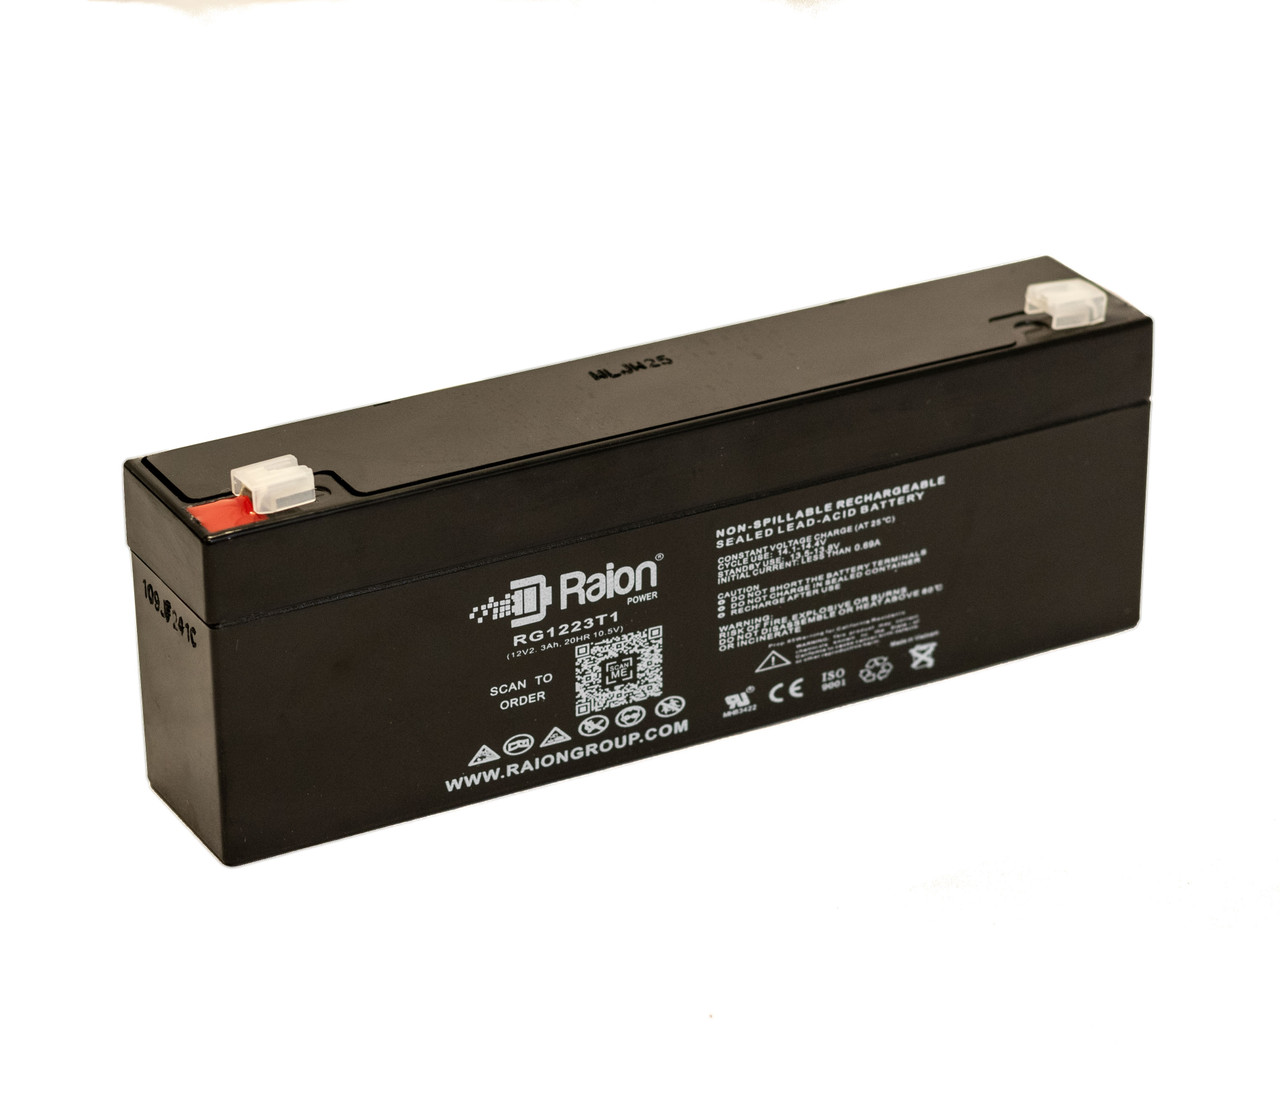 Raion Power RG1223T1 Replacement Battery for Siemens Servo 300A